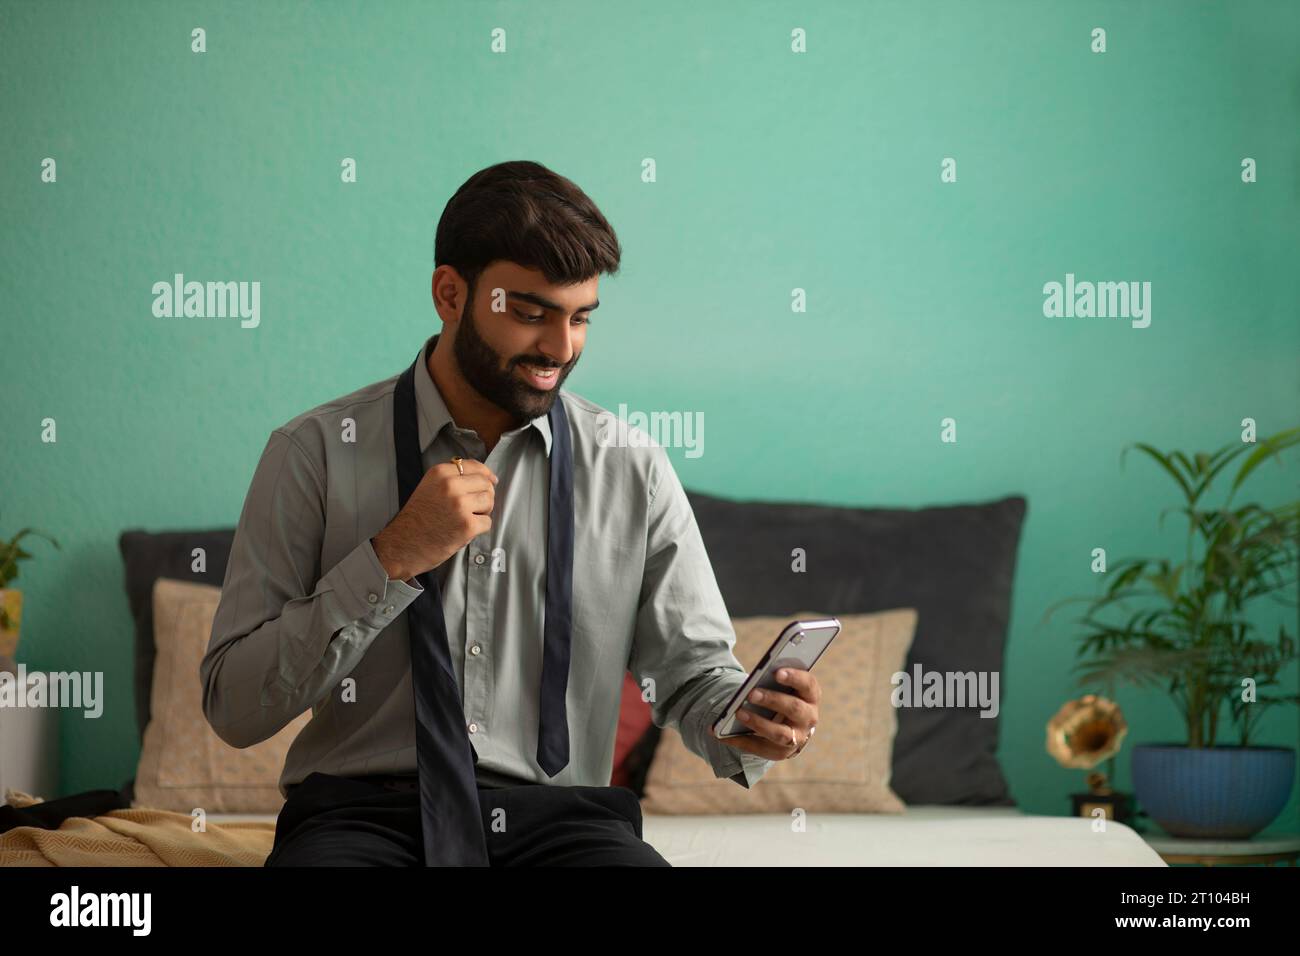 Young man using mobile phone while getting dressed Stock Photo